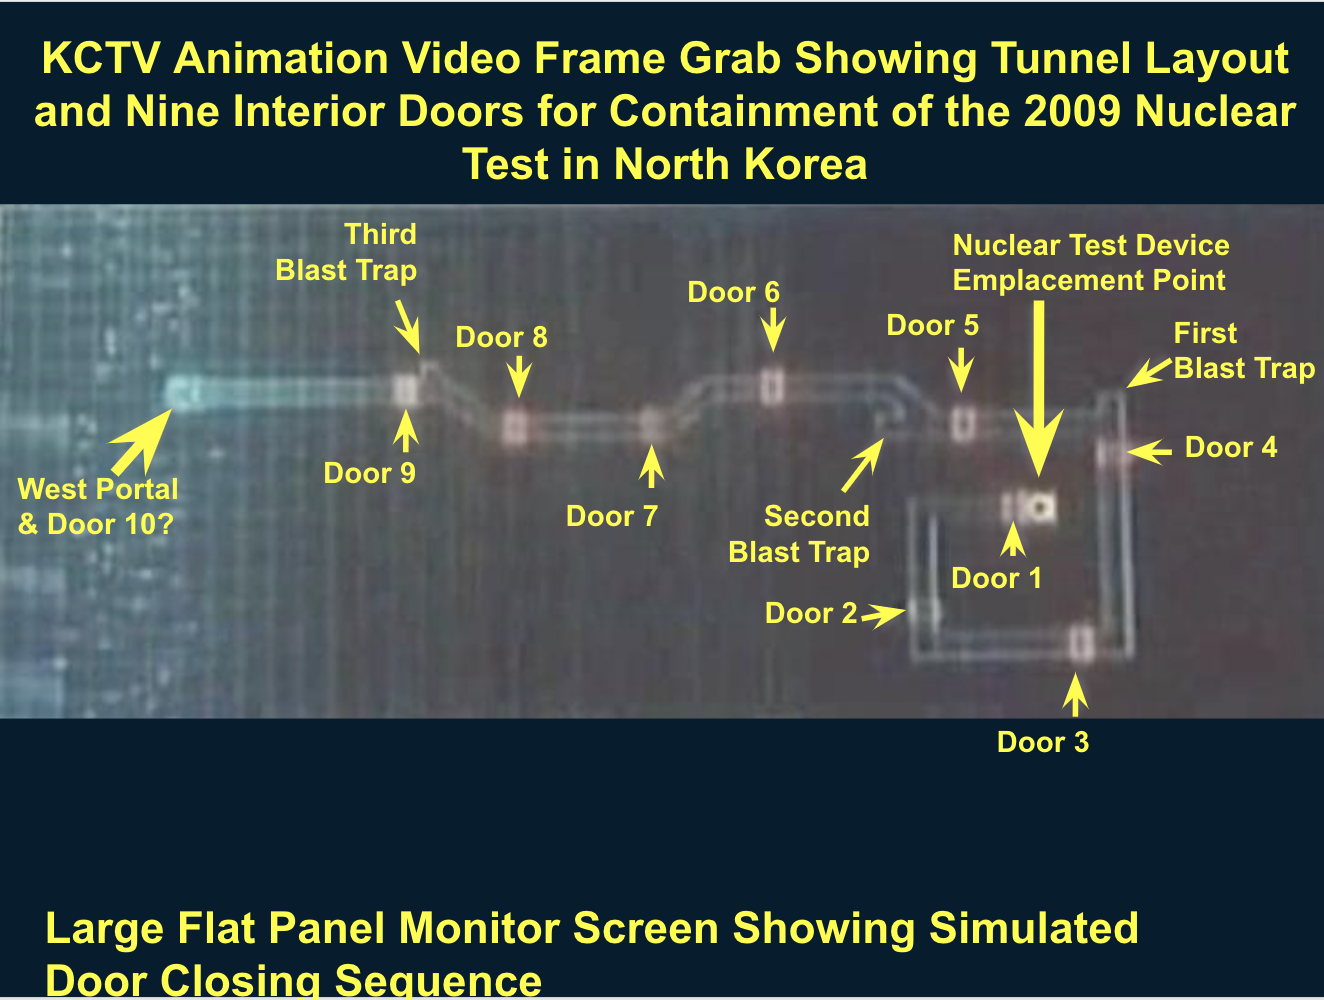 Large flat panel monitor screen showing simulated door closing sequence